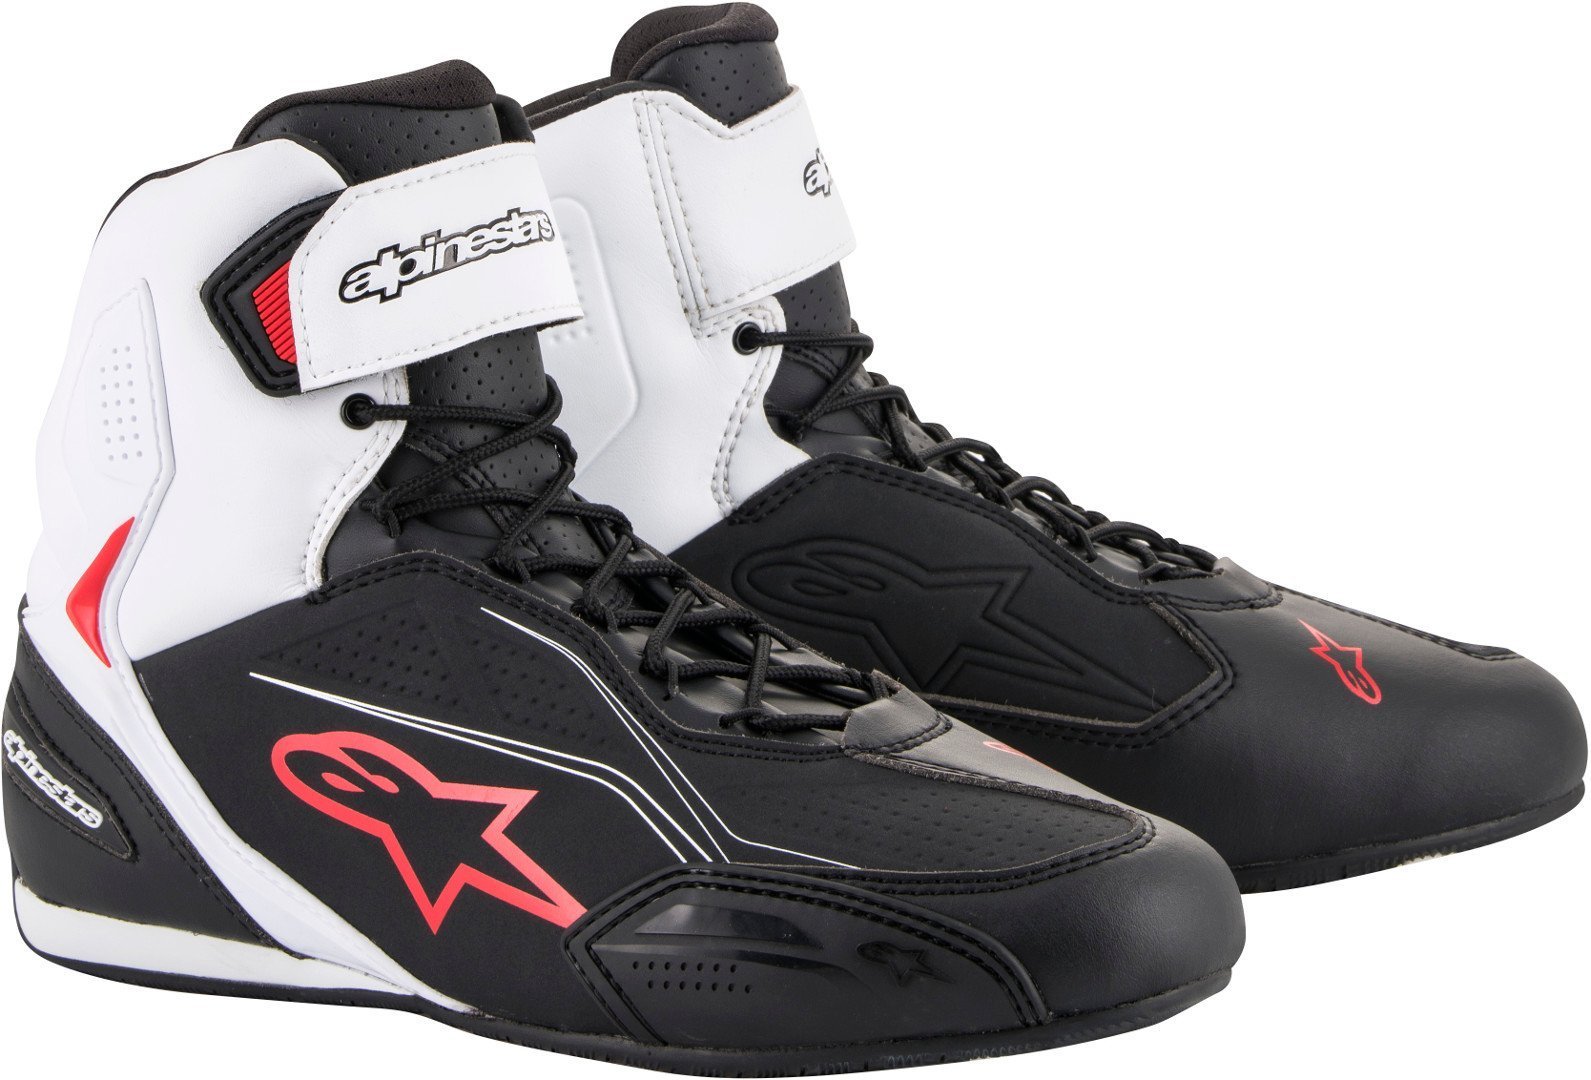 Alpinestars Faster-3 Motorcycle Shoes, black-white-red, Size 47, black-white-red, Size 47